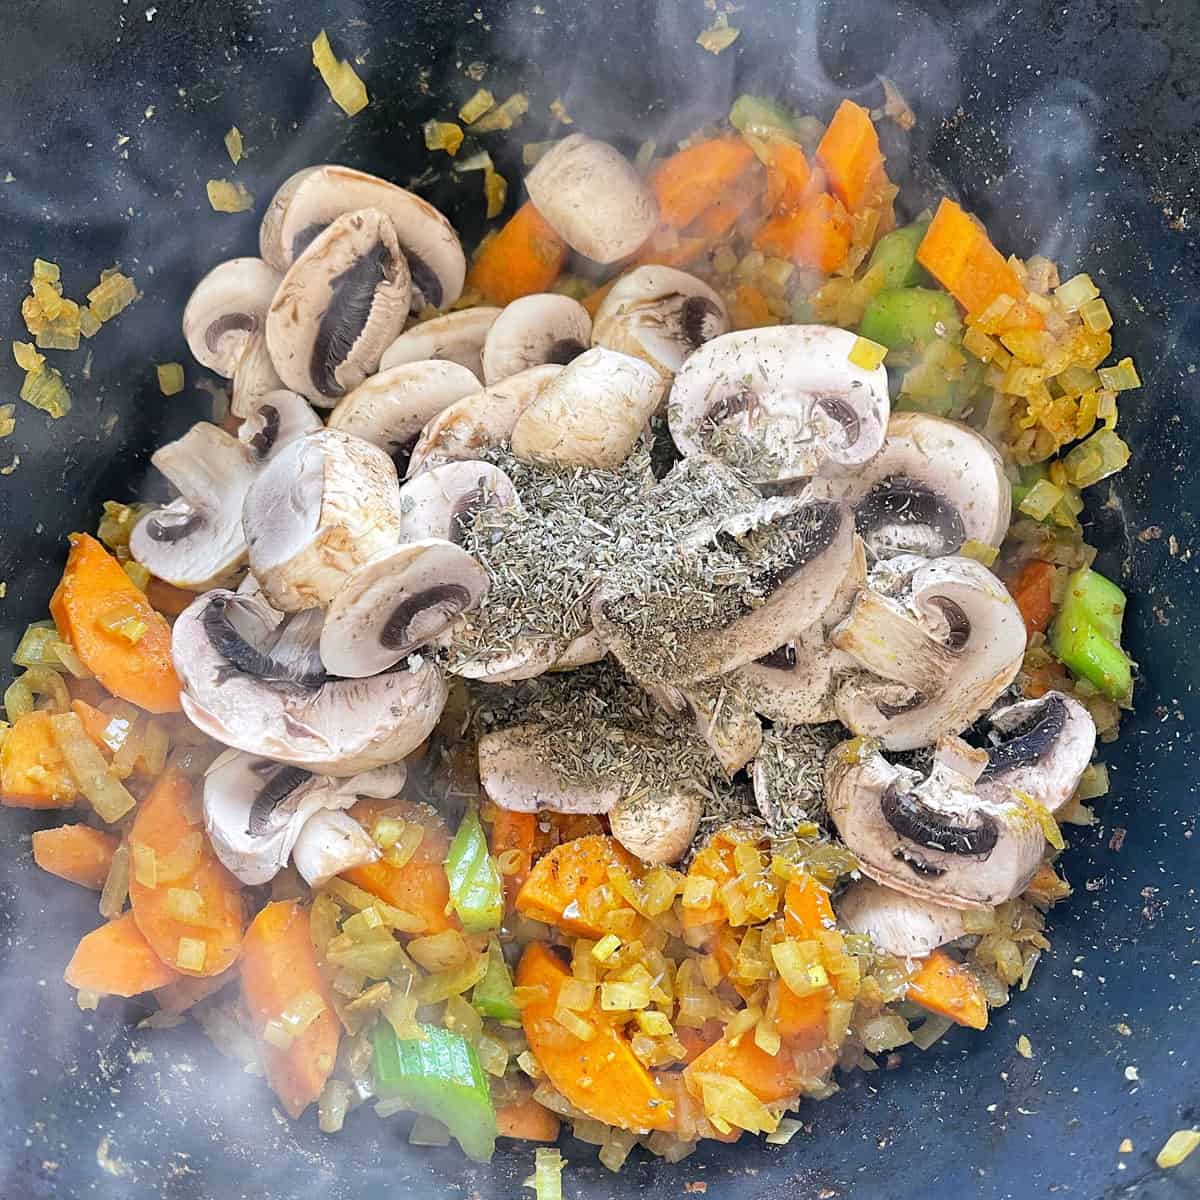 Vegetables, mushrooms and herbs cooking in a pot.